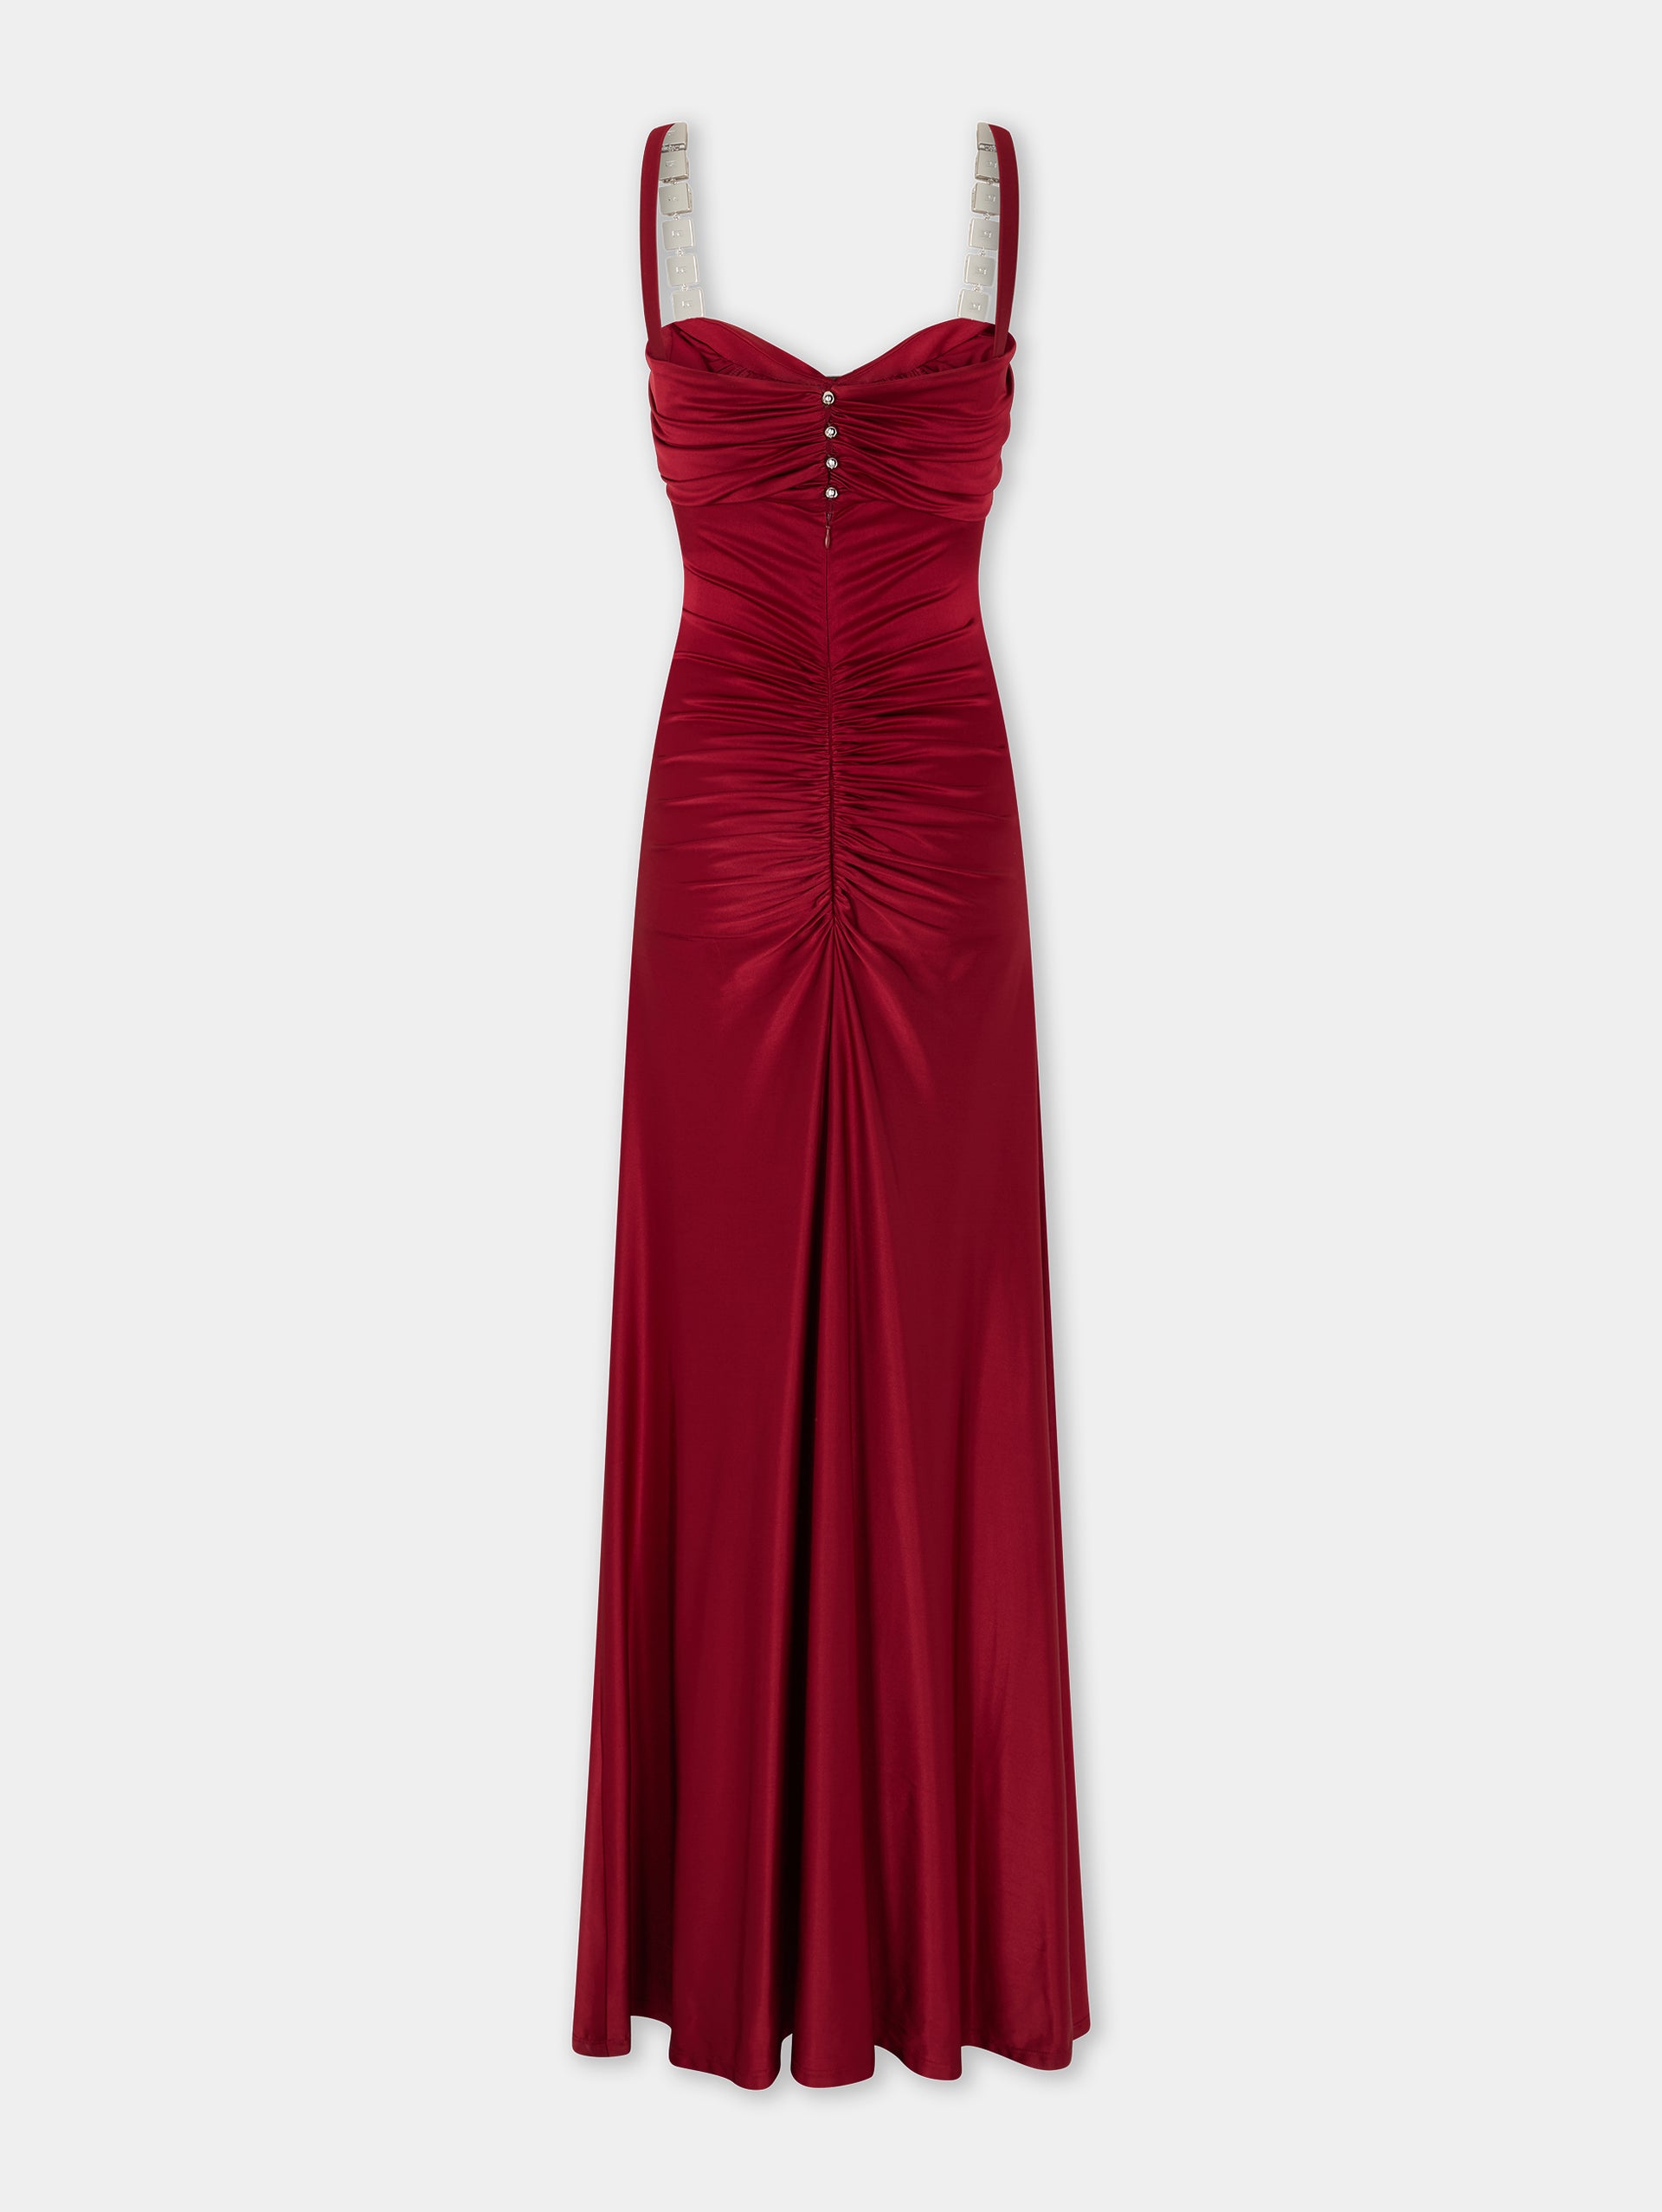 Ruby draped maxi dress with mirror-effect embellishments